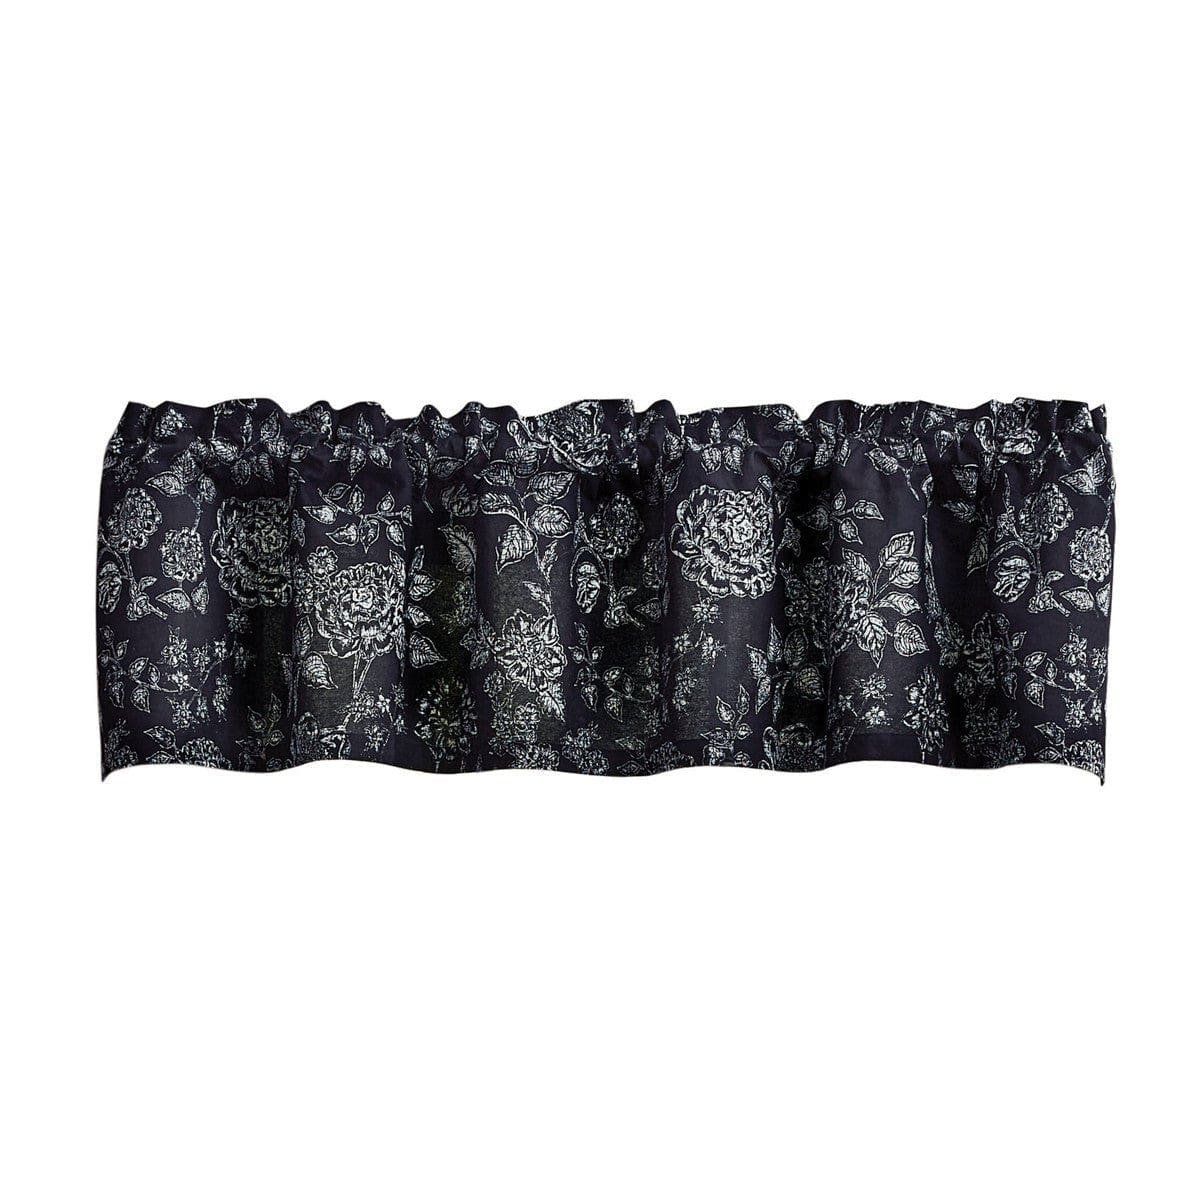 Blooming Printed Valance Unlined-Park Designs-The Village Merchant